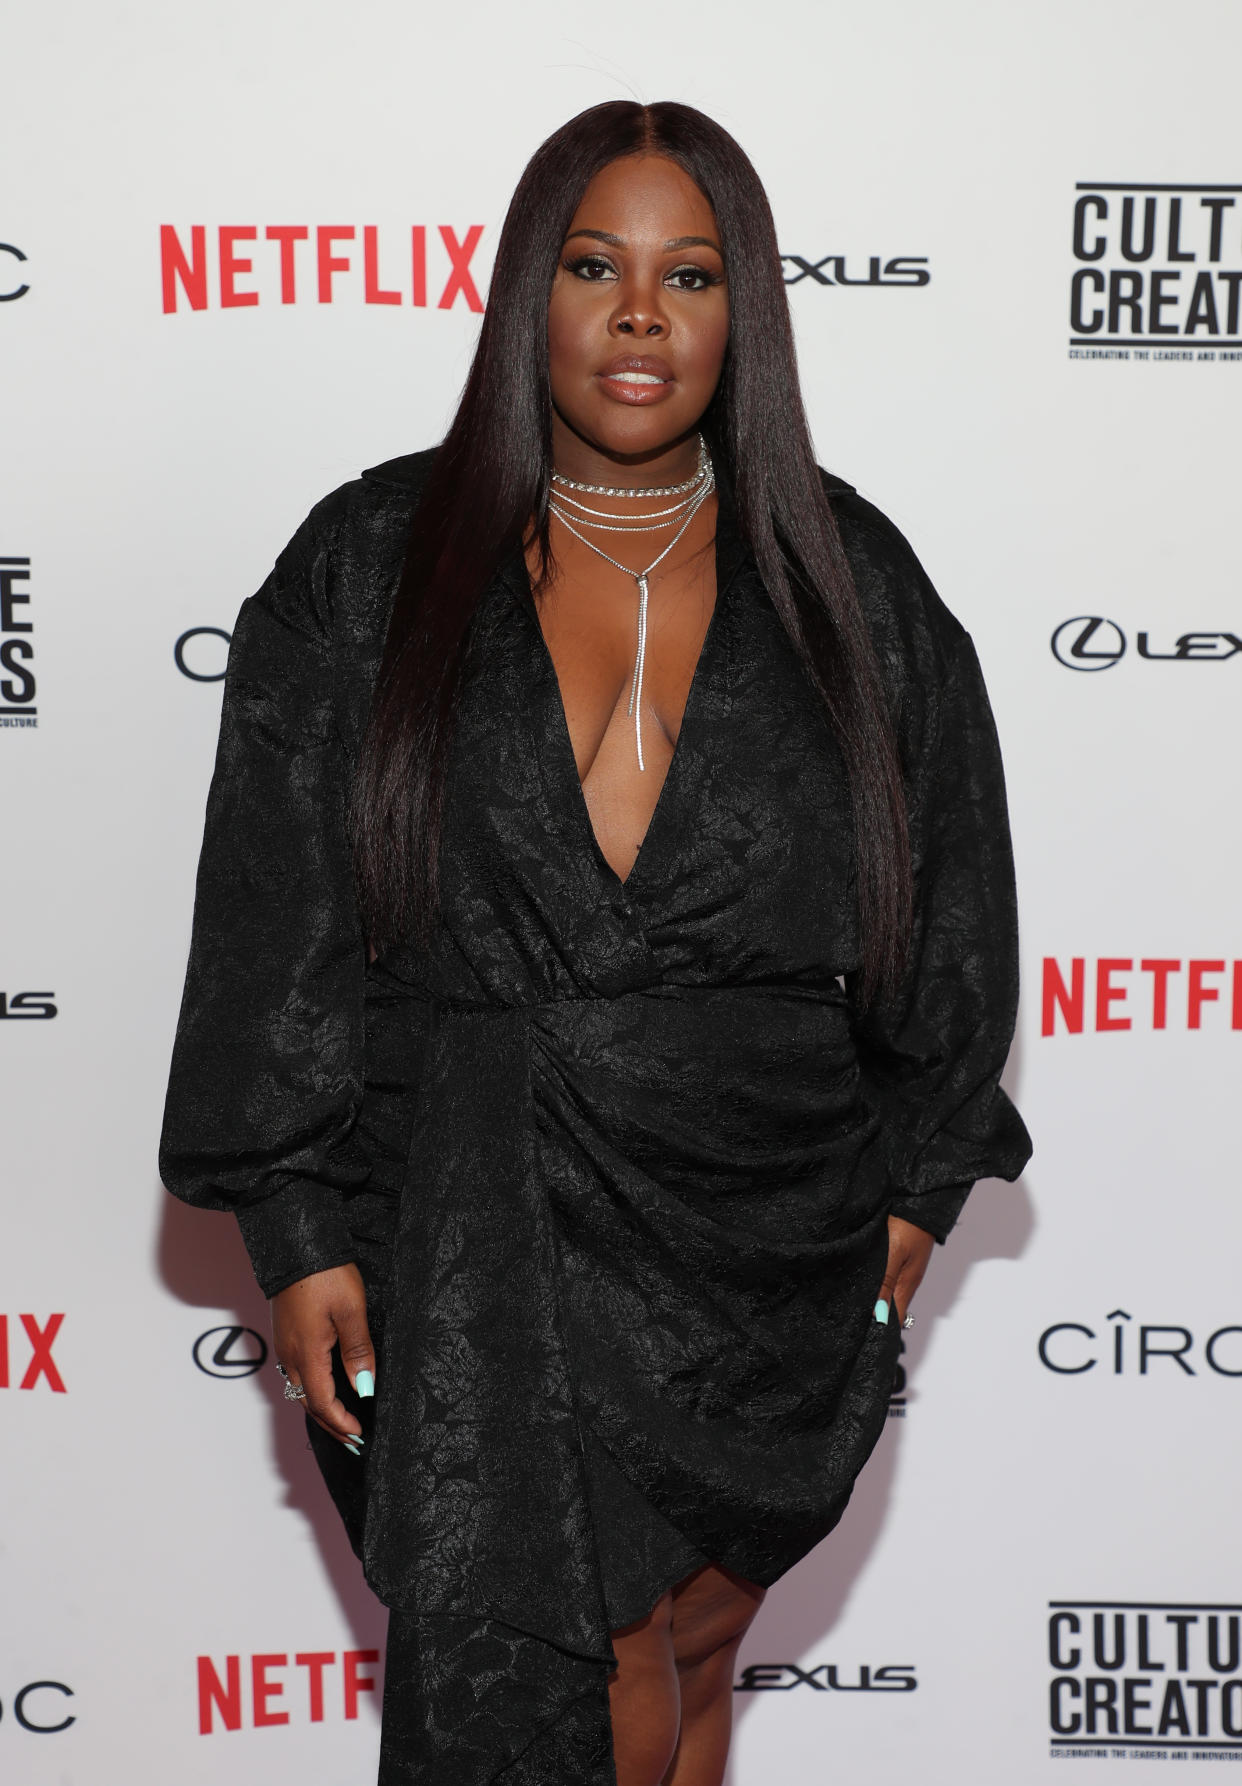 BEVERLY HILLS, CALIFORNIA - JUNE 23: Singer Amber Riley attends the Culture Creators Awards Brunch at The Beverly Hilton on June 23, 2022 in Beverly Hills, California. (Photo by Jerritt Clark/Getty Images for Culture Creators)